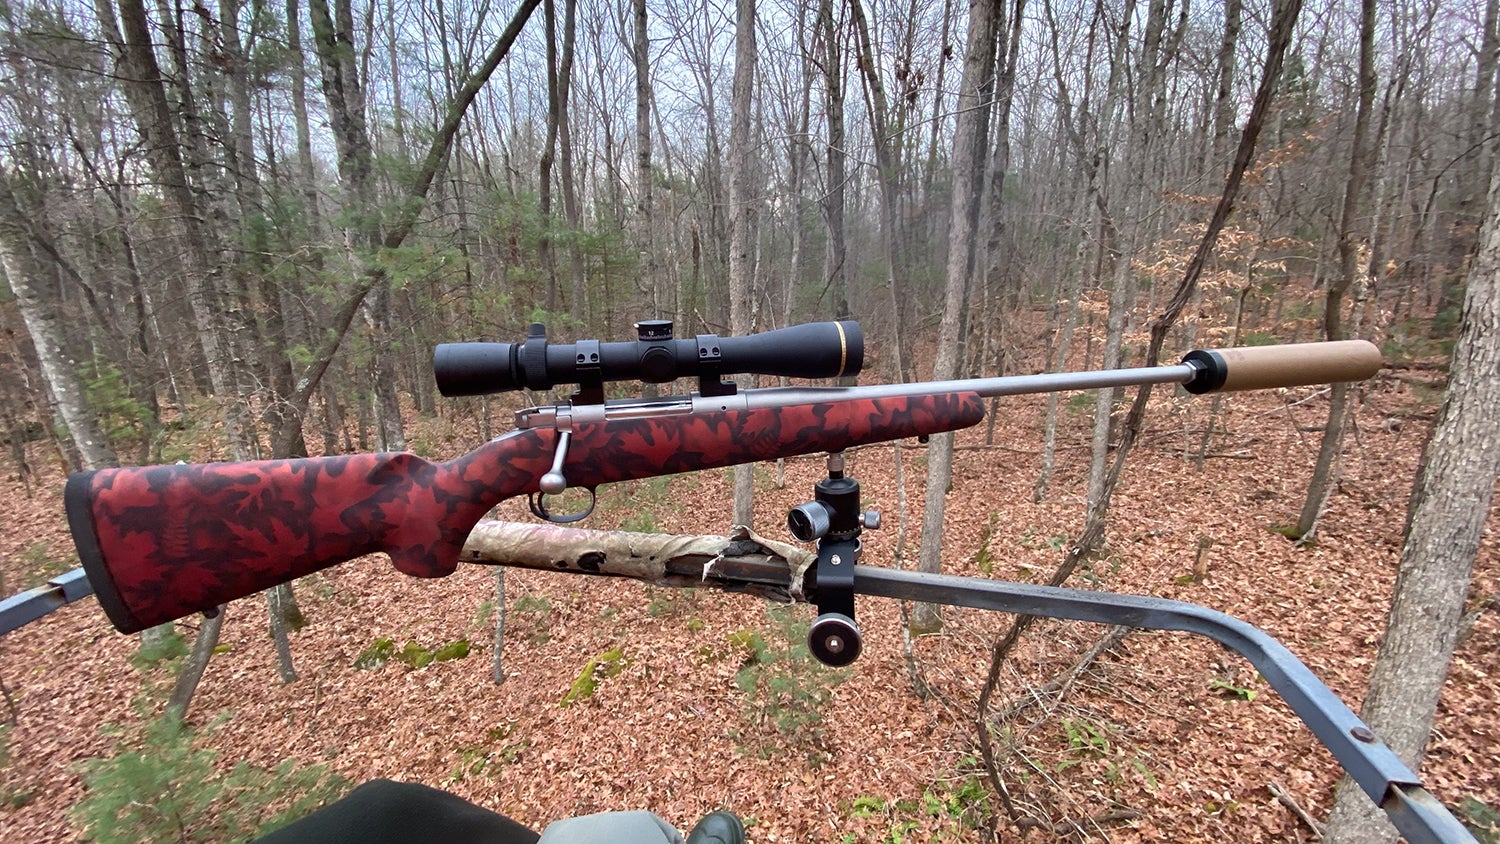 A Kimber rifle with suppressor attached to a tree stand rail.